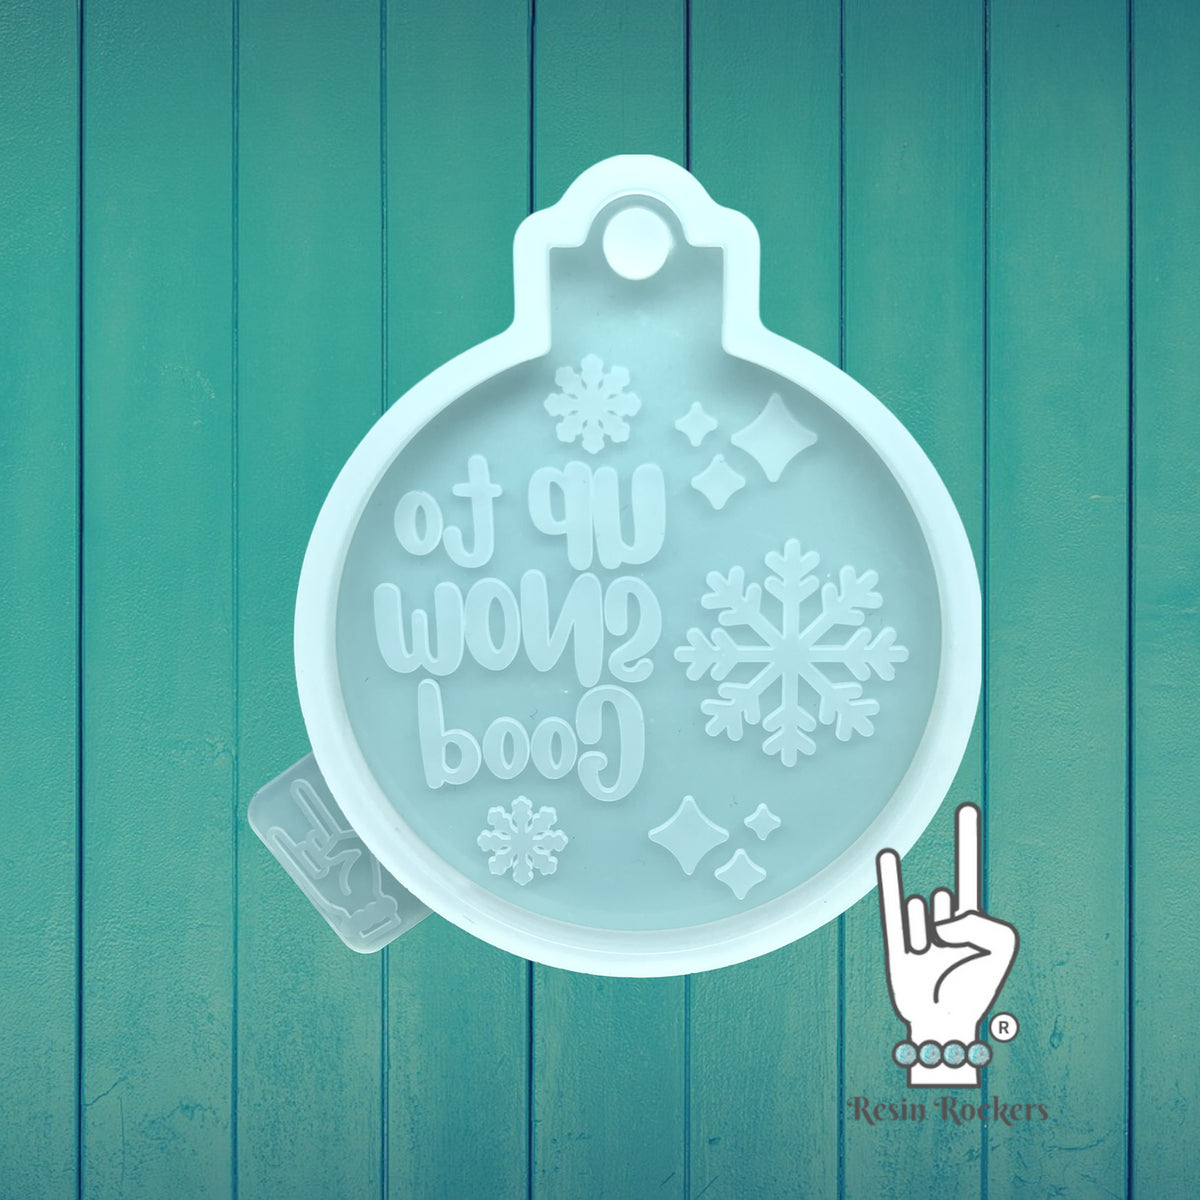 UV Safe Up To Snow Good Resin Rockers Exclusive Ornament Mold for UV and Epoxy Resin Art